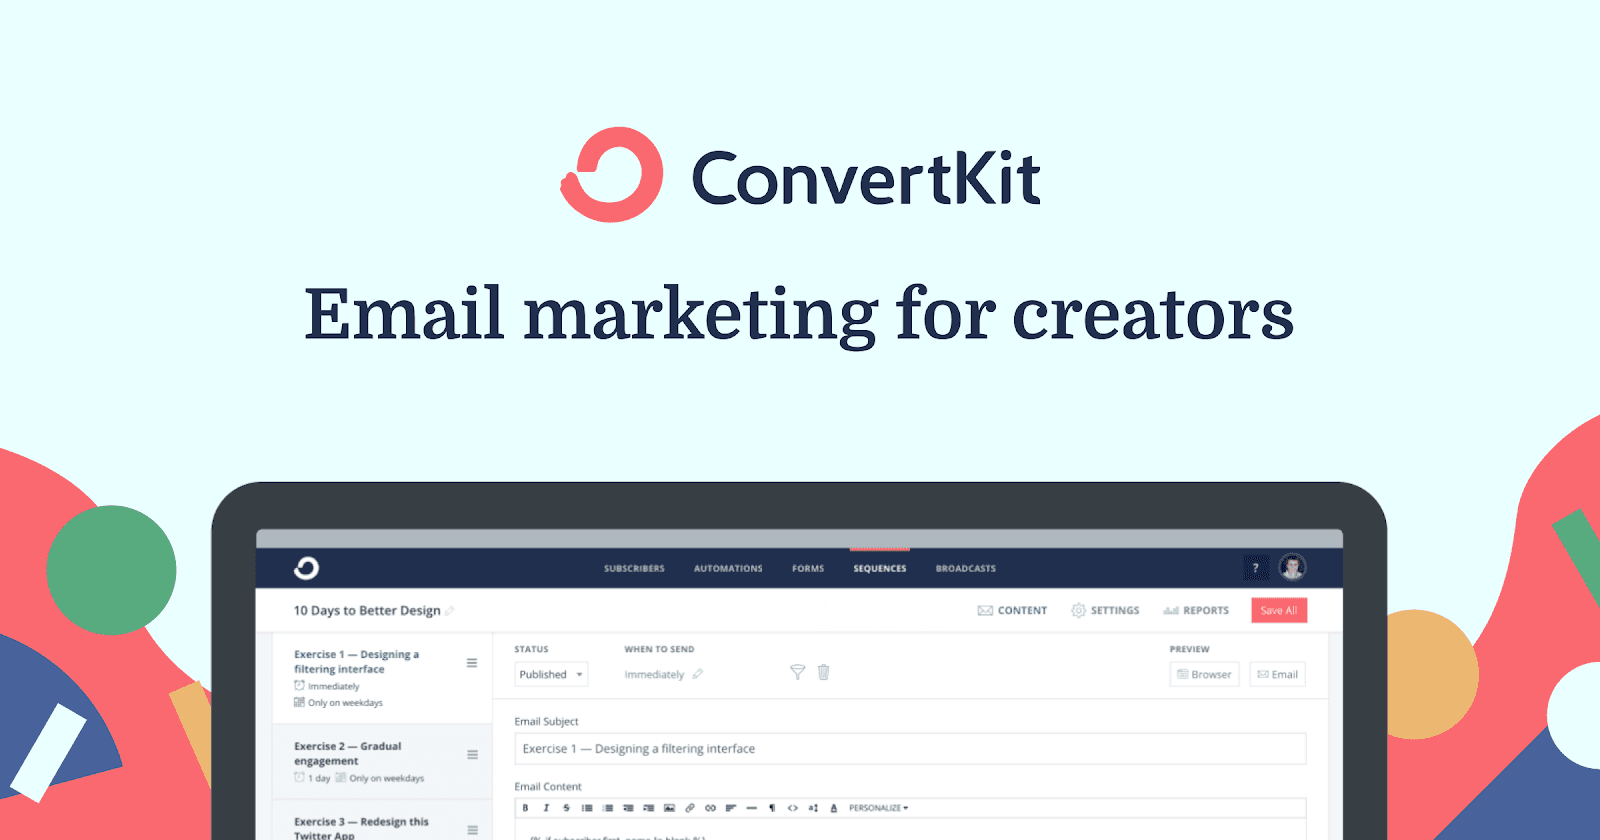 ConverKit - email marketing for creators